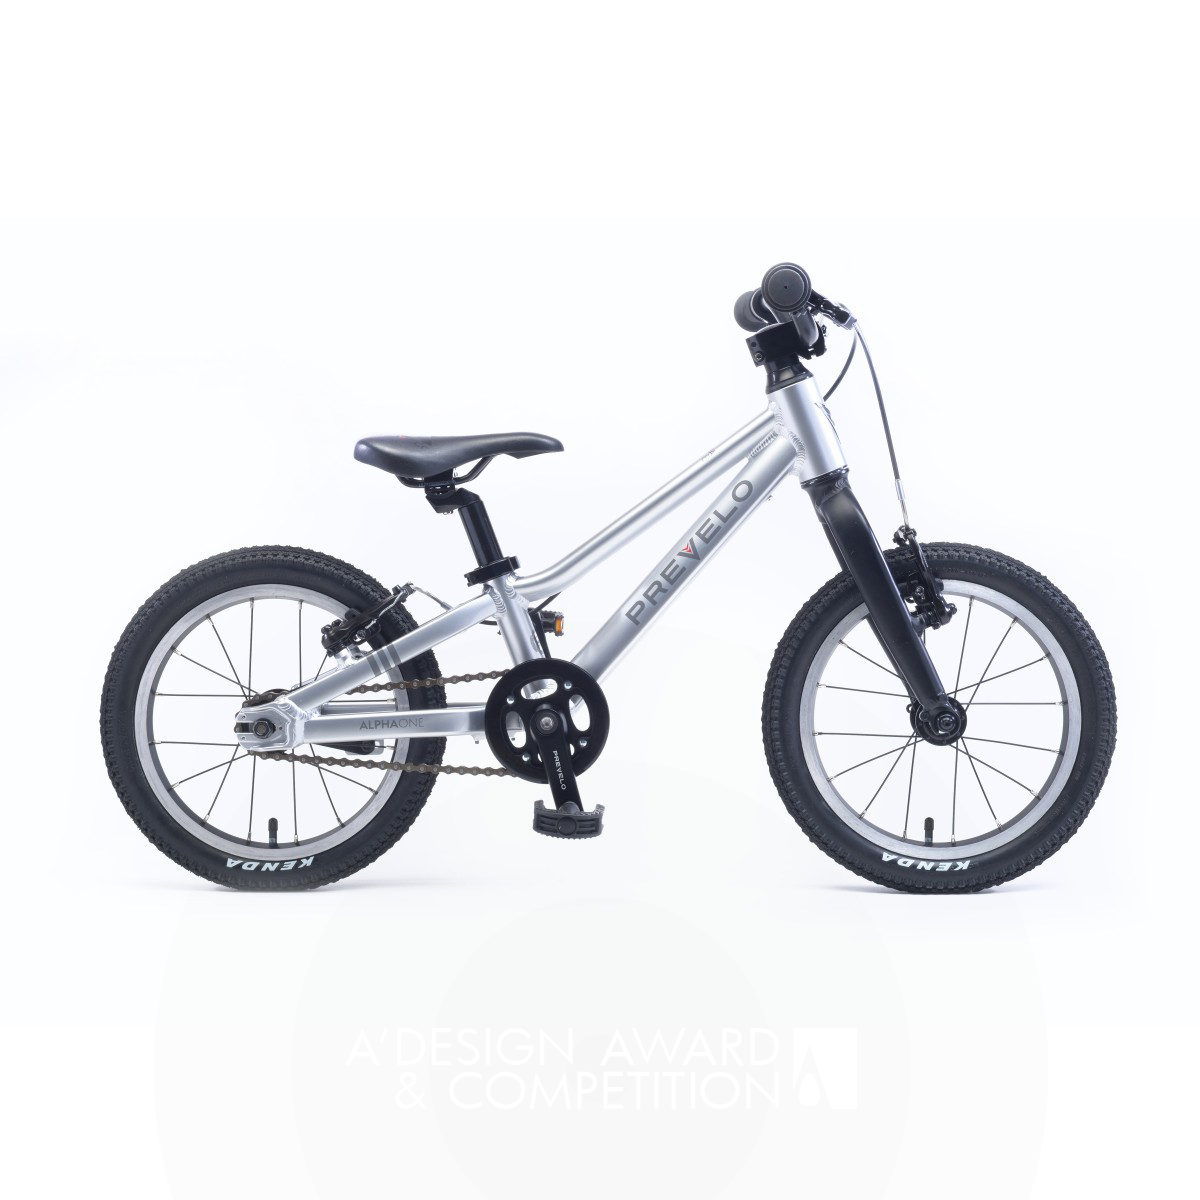 Prevelo Alpha One <b>Bicycle for Children